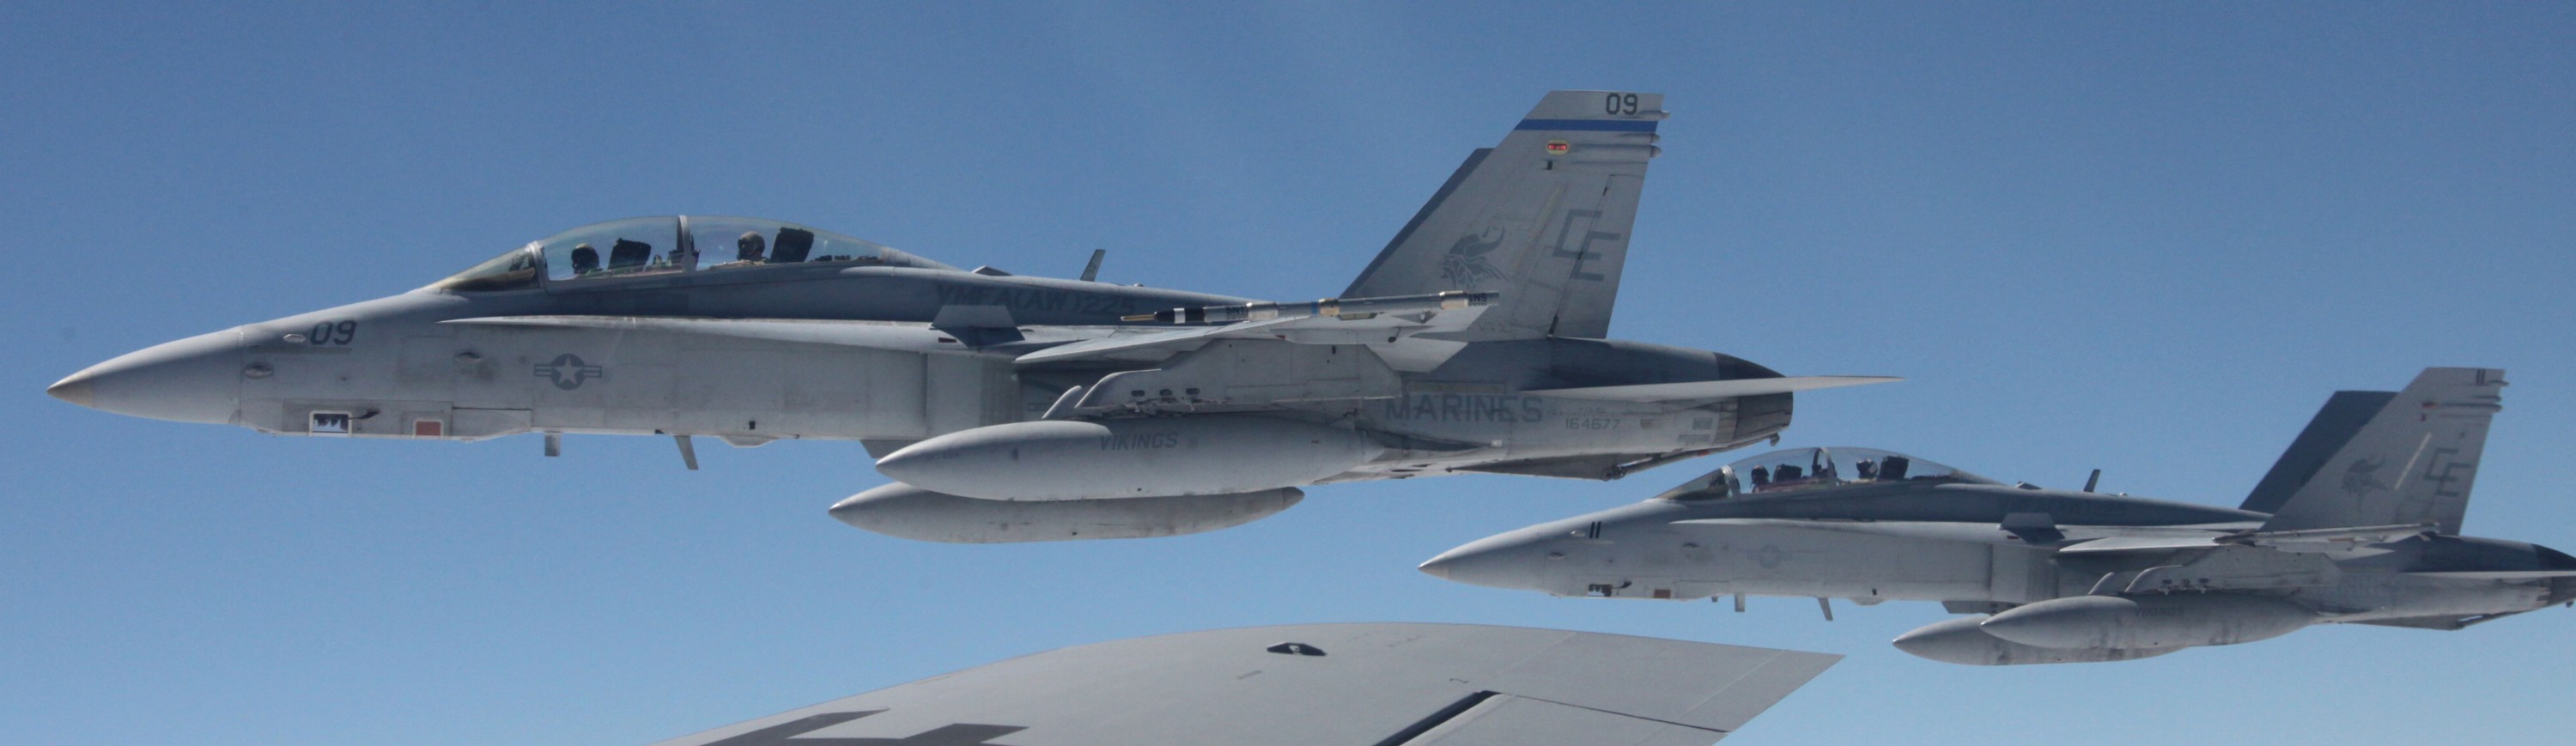 vmfa(aw)-225 vikings marine fighter attack squadron f/a-18d hornet 51